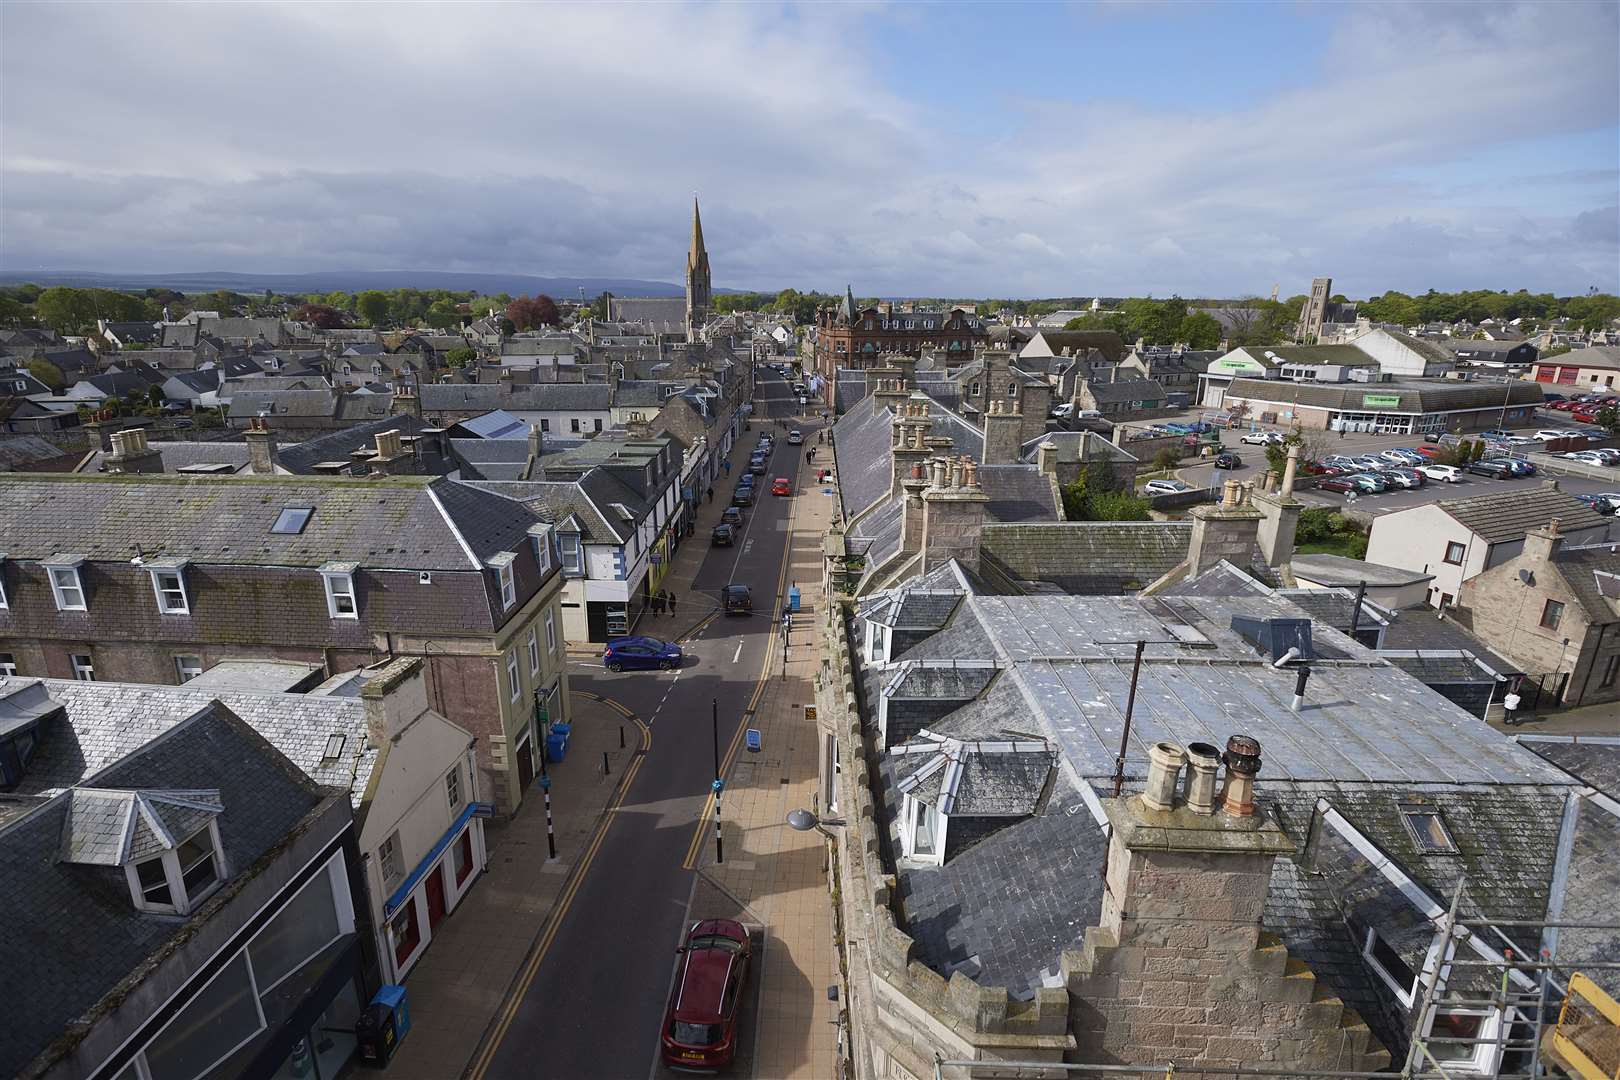 Community will remain important for pulling Nairn through challenging times town leaders believe.